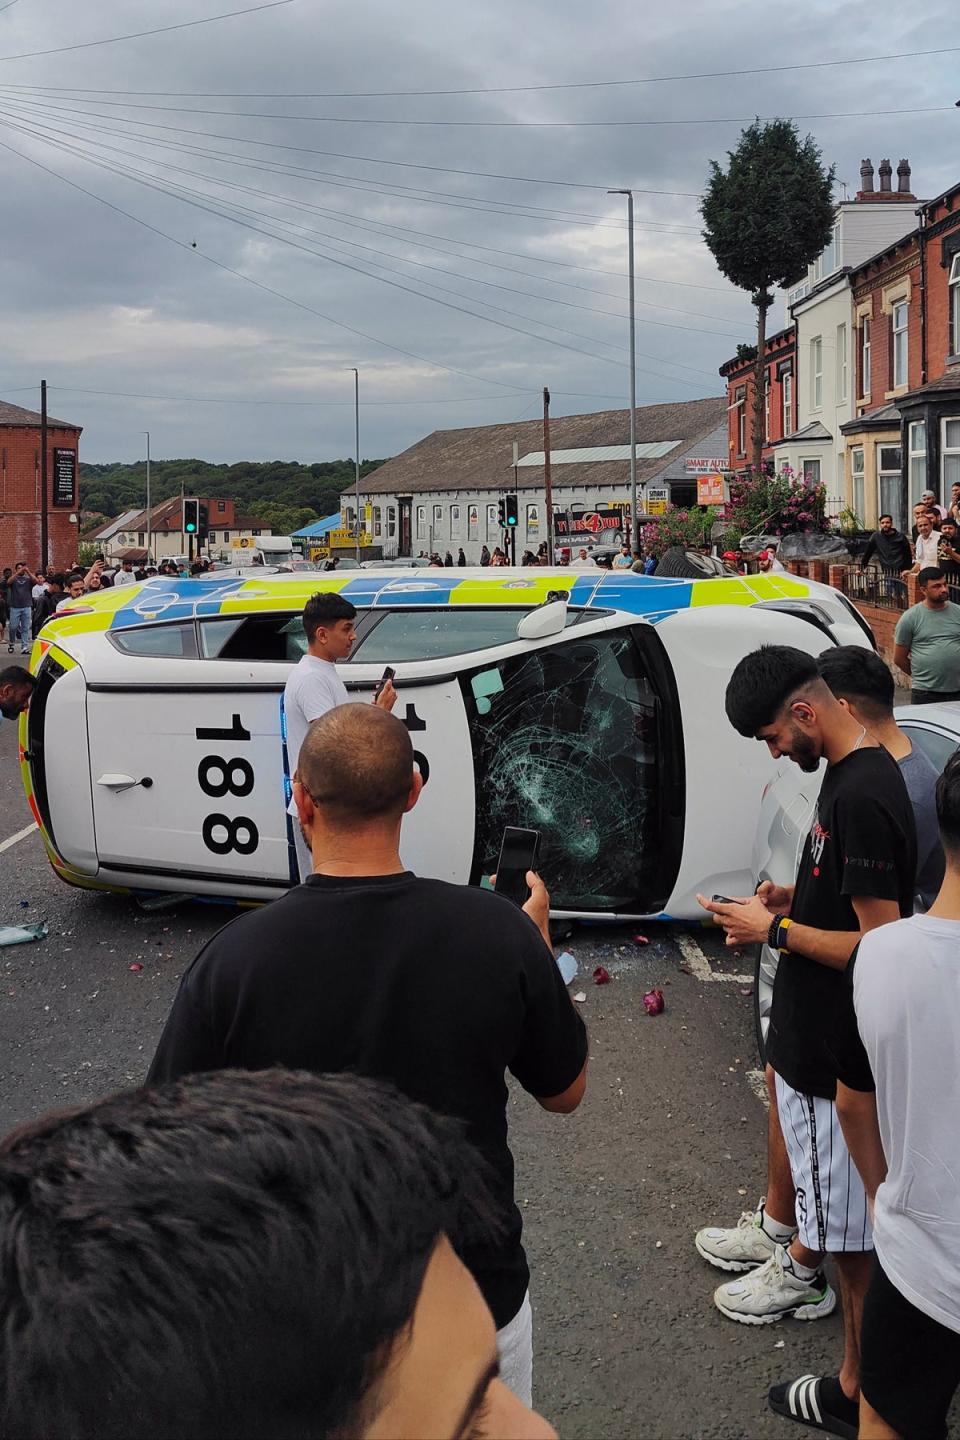 A police car was overturned as part of the disorder (@robin_singh/Instagram via Reuters)